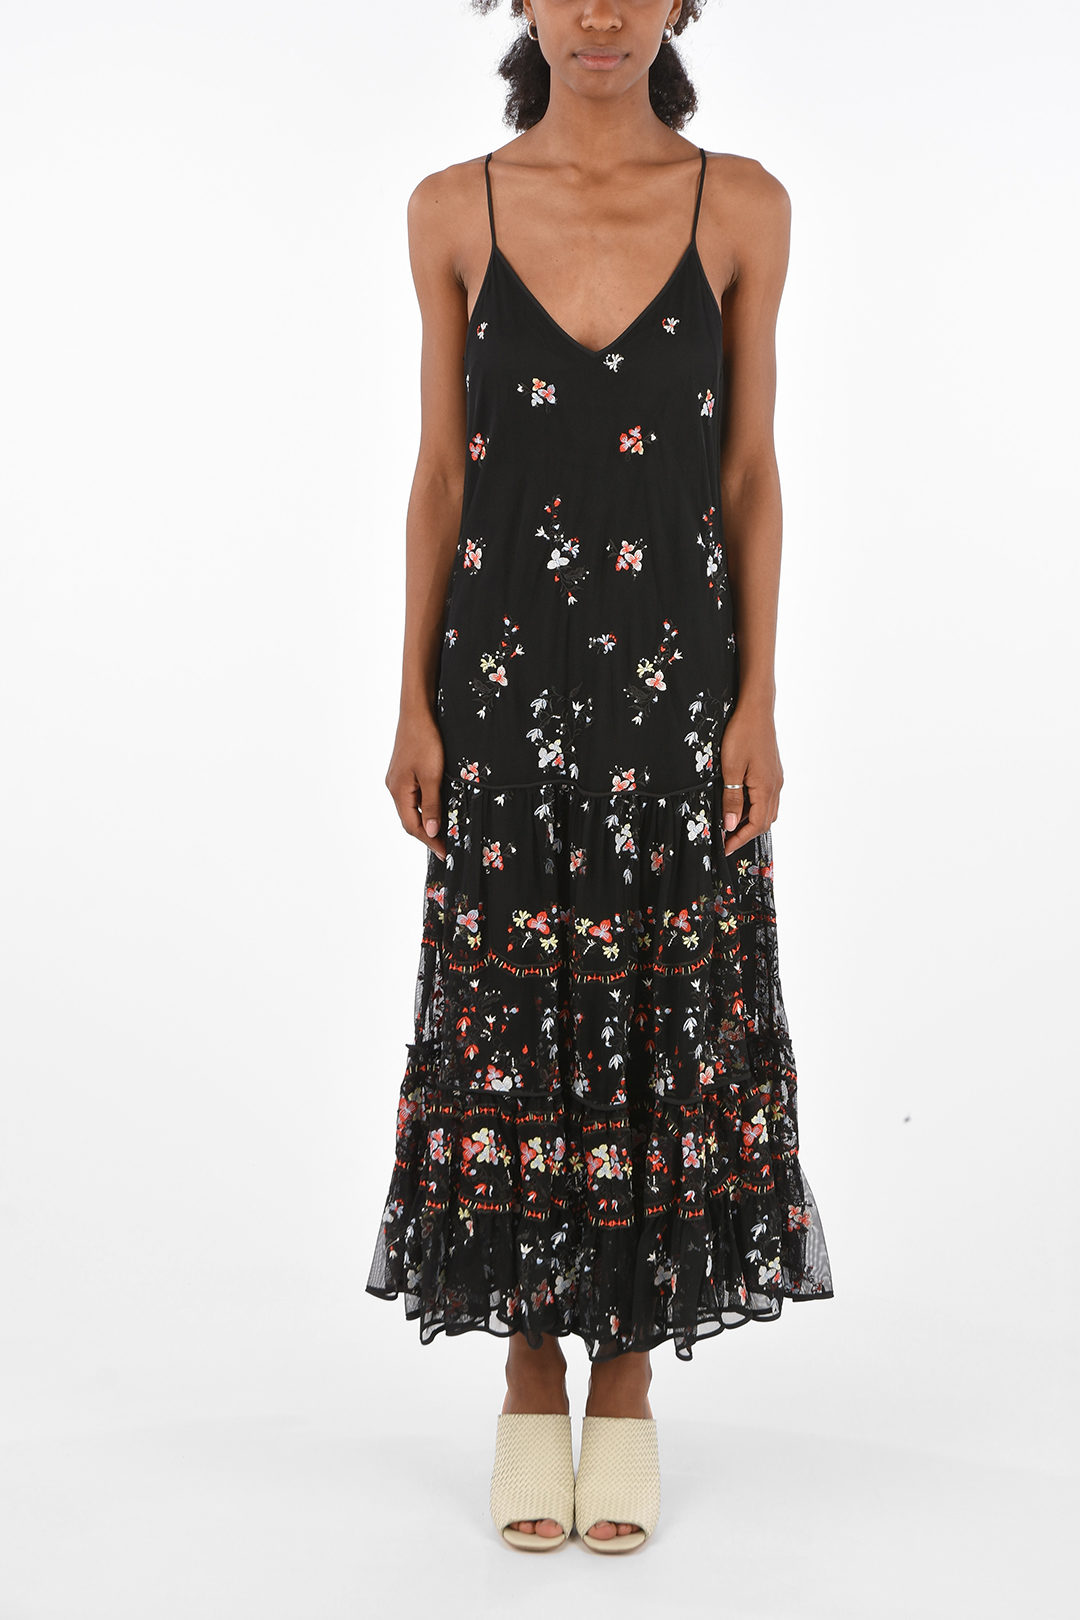 Tory Burch embroidered floral maxi sun dress women - Glamood Outlet